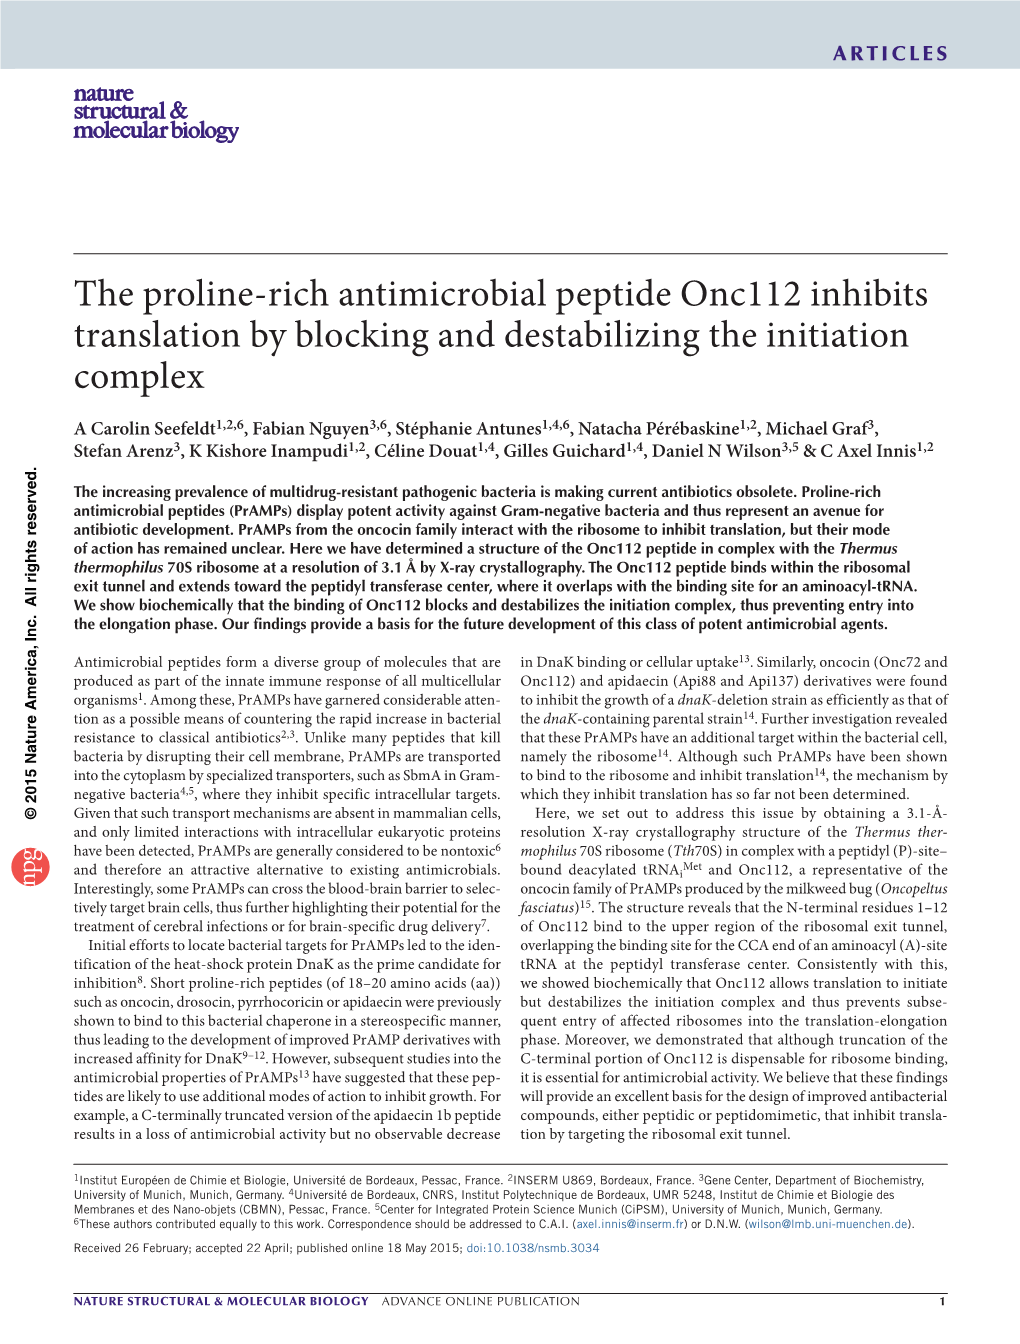 The Proline-Rich Antimicrobial Peptide Onc112 Inhibits Translation By